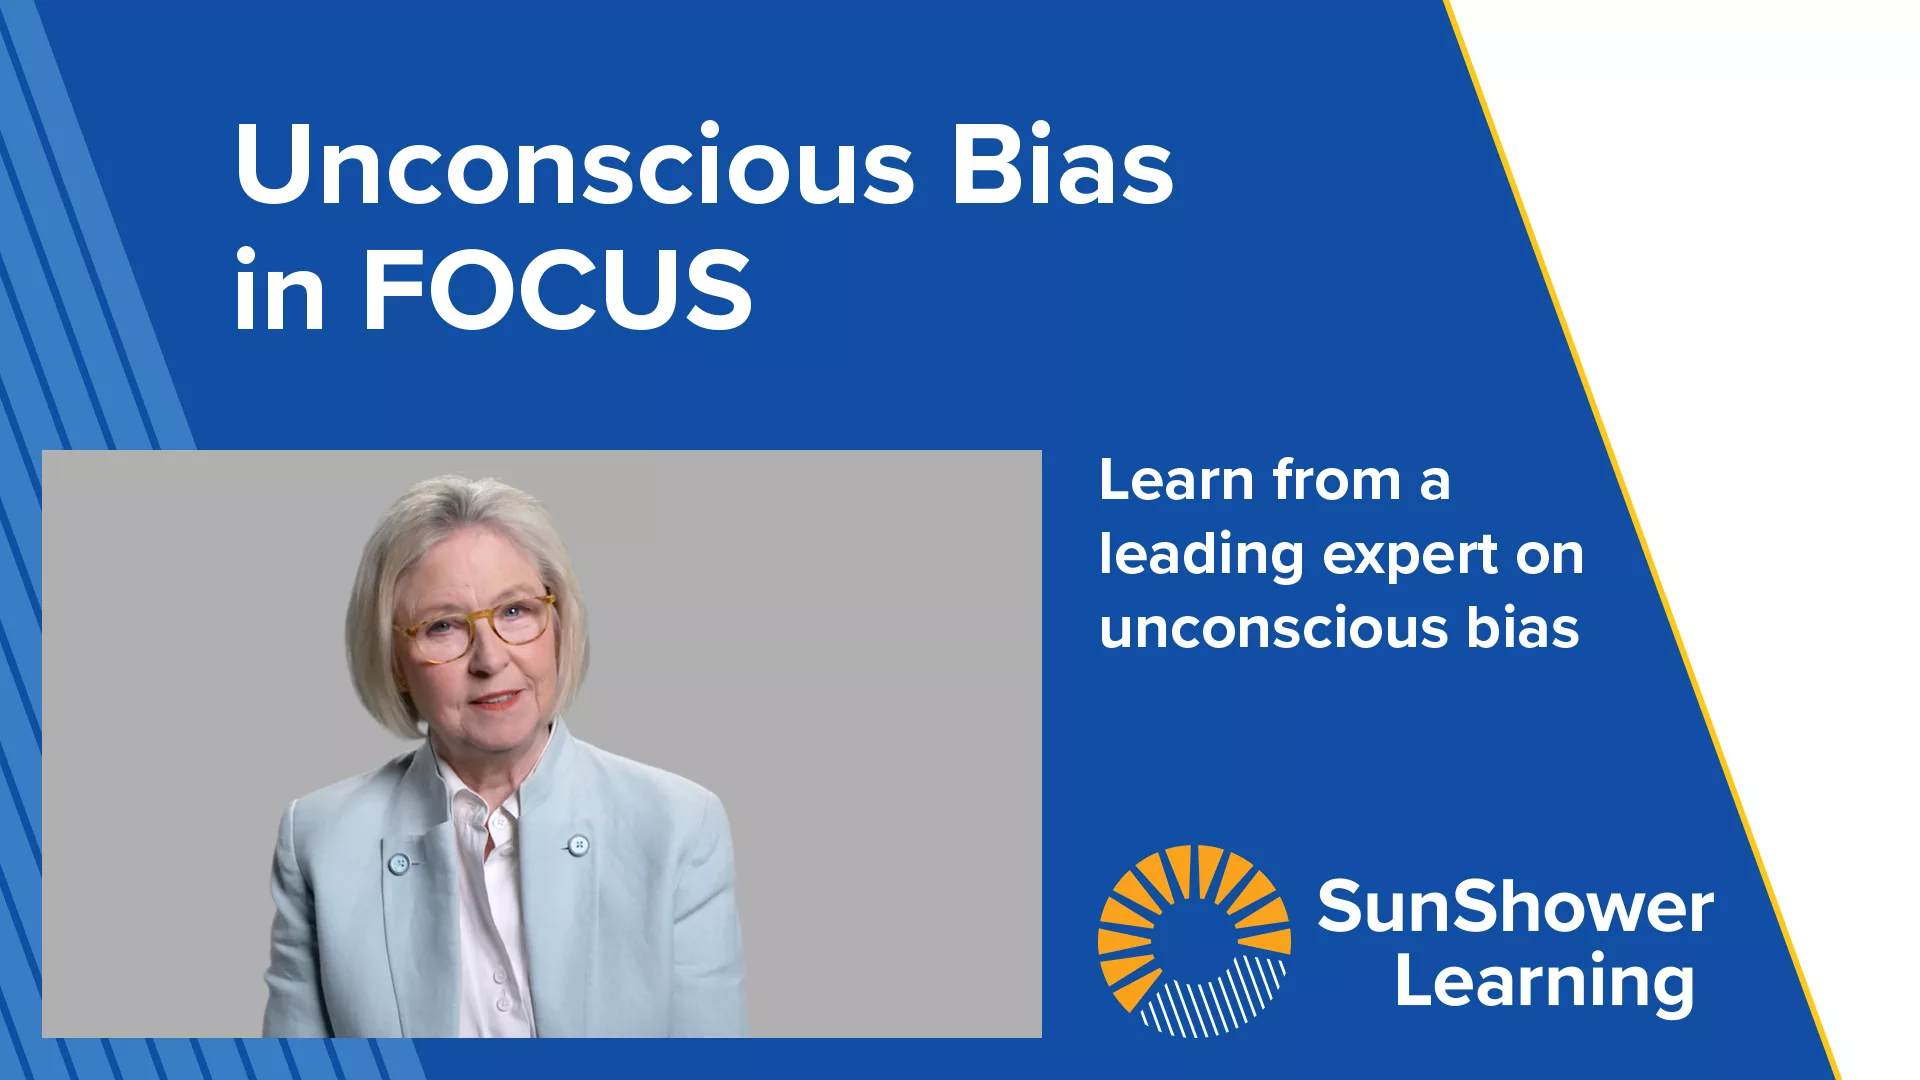 Thumbnail image with title, Unconscious Bias in FOCUS and text, Learn from a leading expert on unconscious bias. Telly award seal.